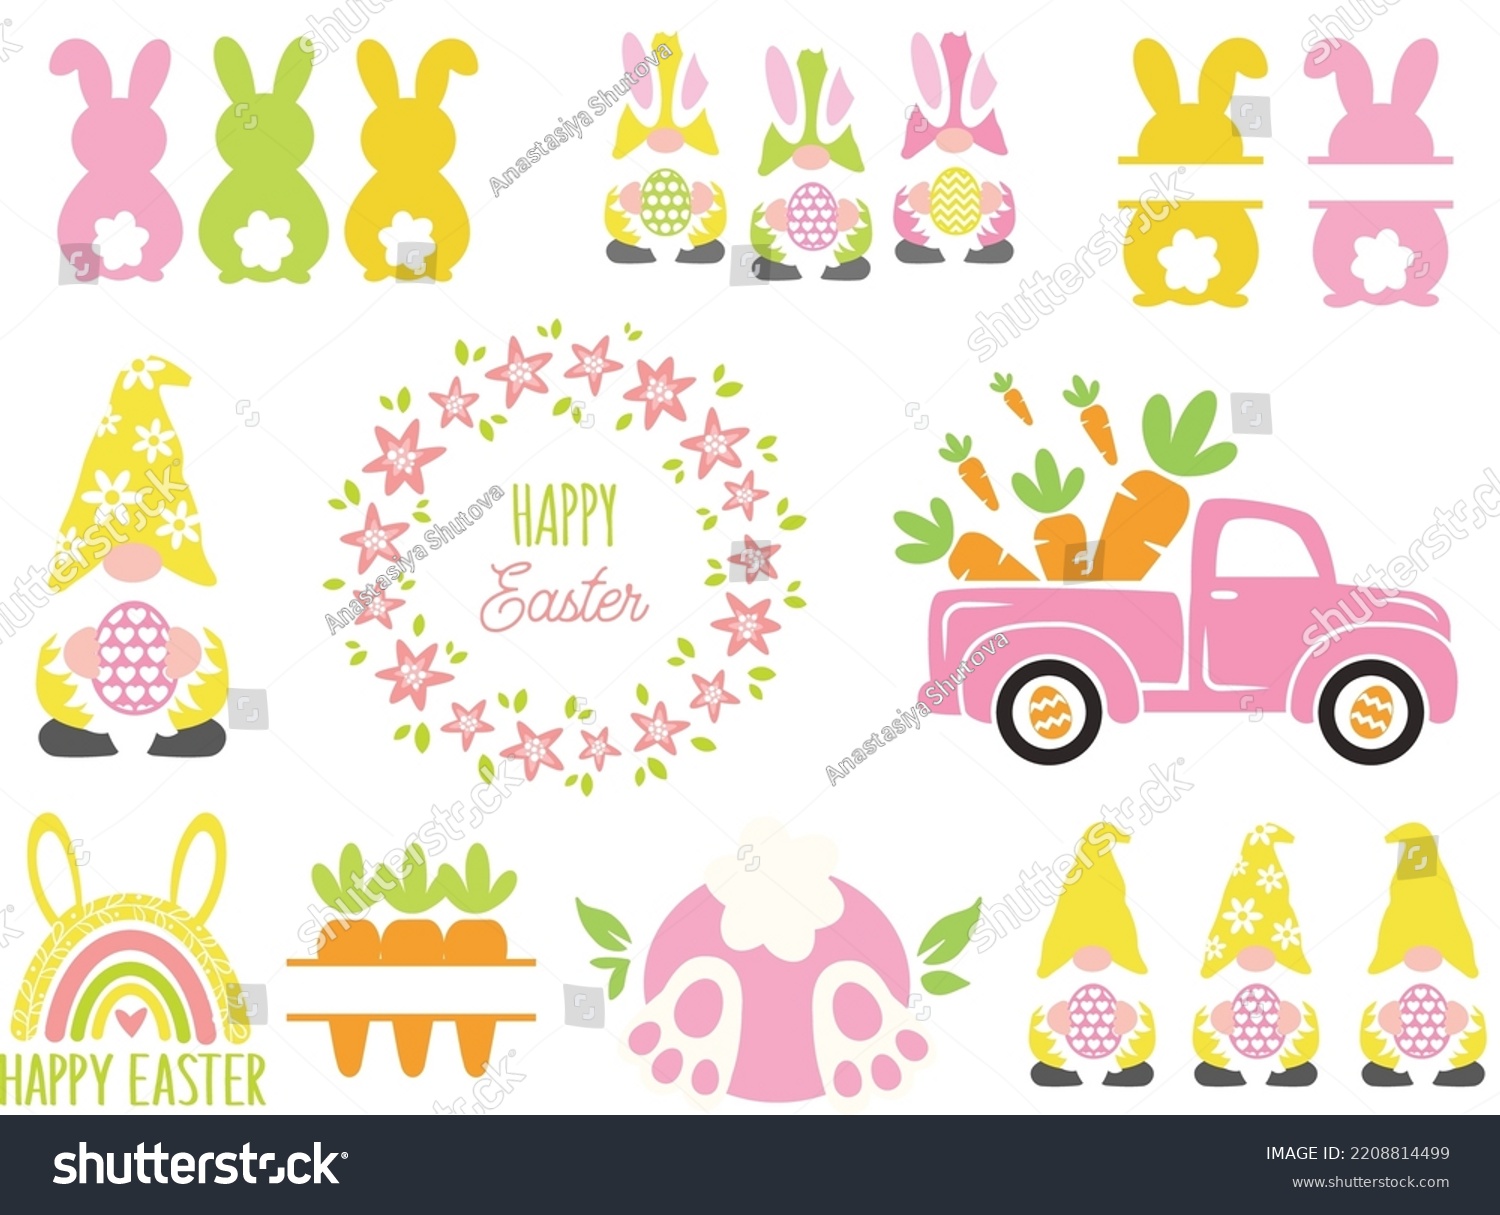 SVG of Cute Easter Svg Bundle. Easter gnomes vector illustration isolated on white background. Easter clipart - carrot truck, bunny split, floral sign, rainbow, bunny tail. Spring kids shirt design svg